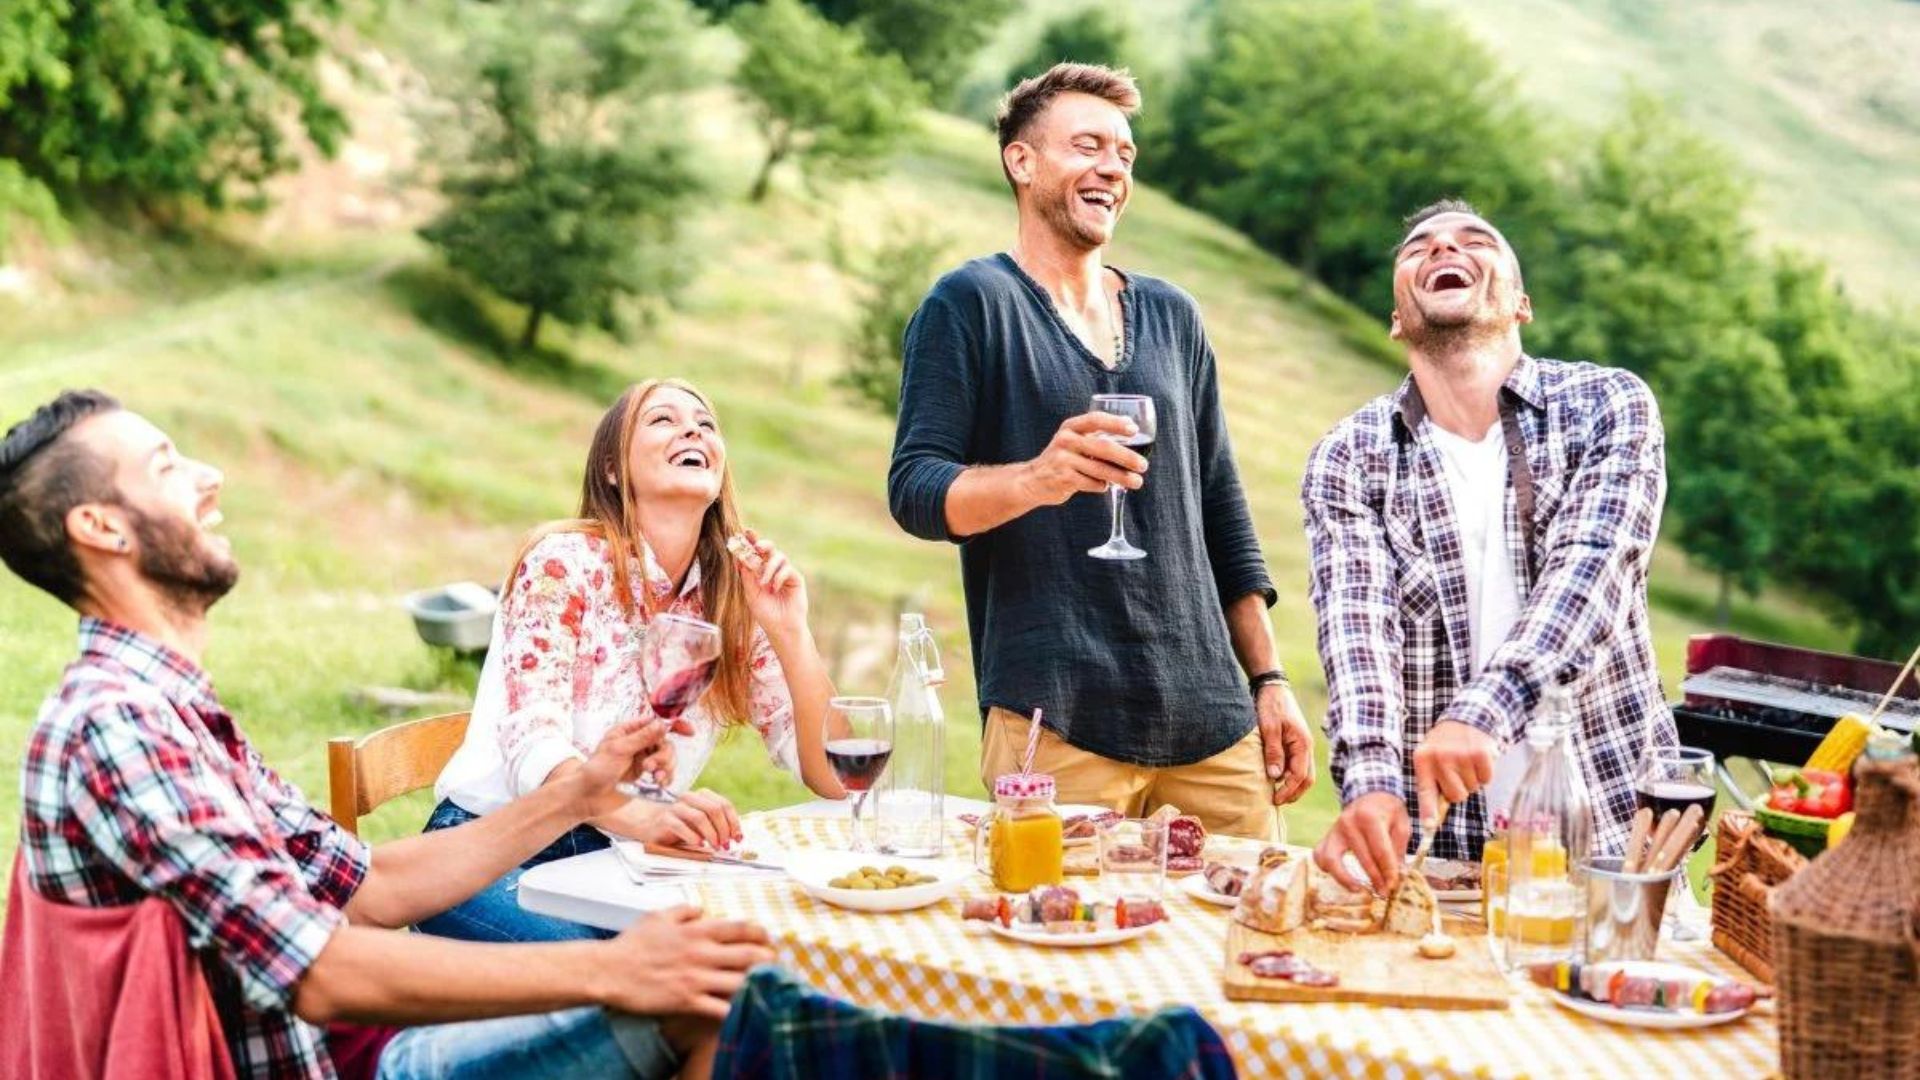 people laughing while having drinks showing an outdoor party 